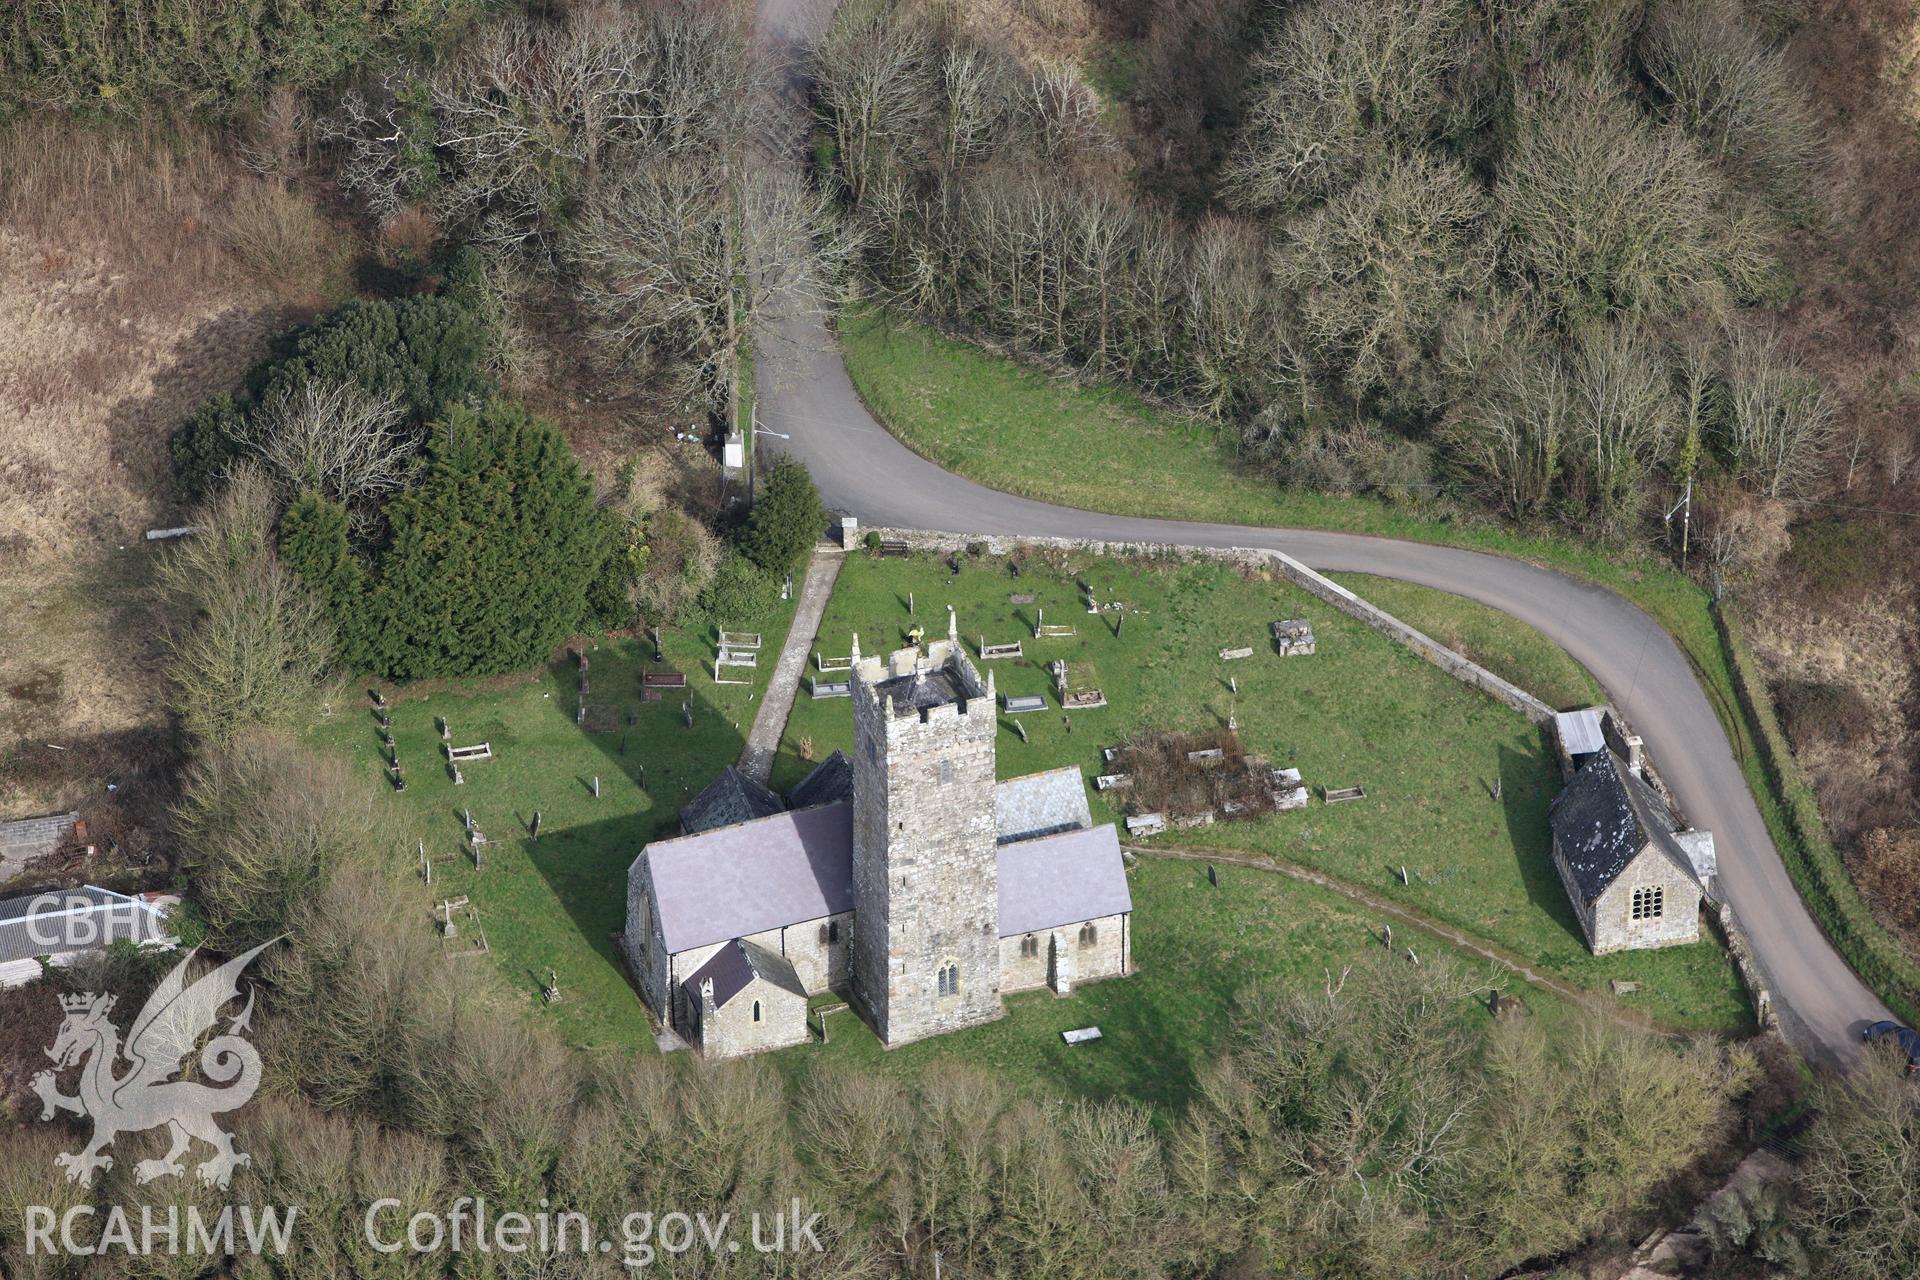 RCAHMW colour oblique aerial photograph of St Decumanus' Church, Rhoscrowther. Taken on 02 March 2010 by Toby Driver